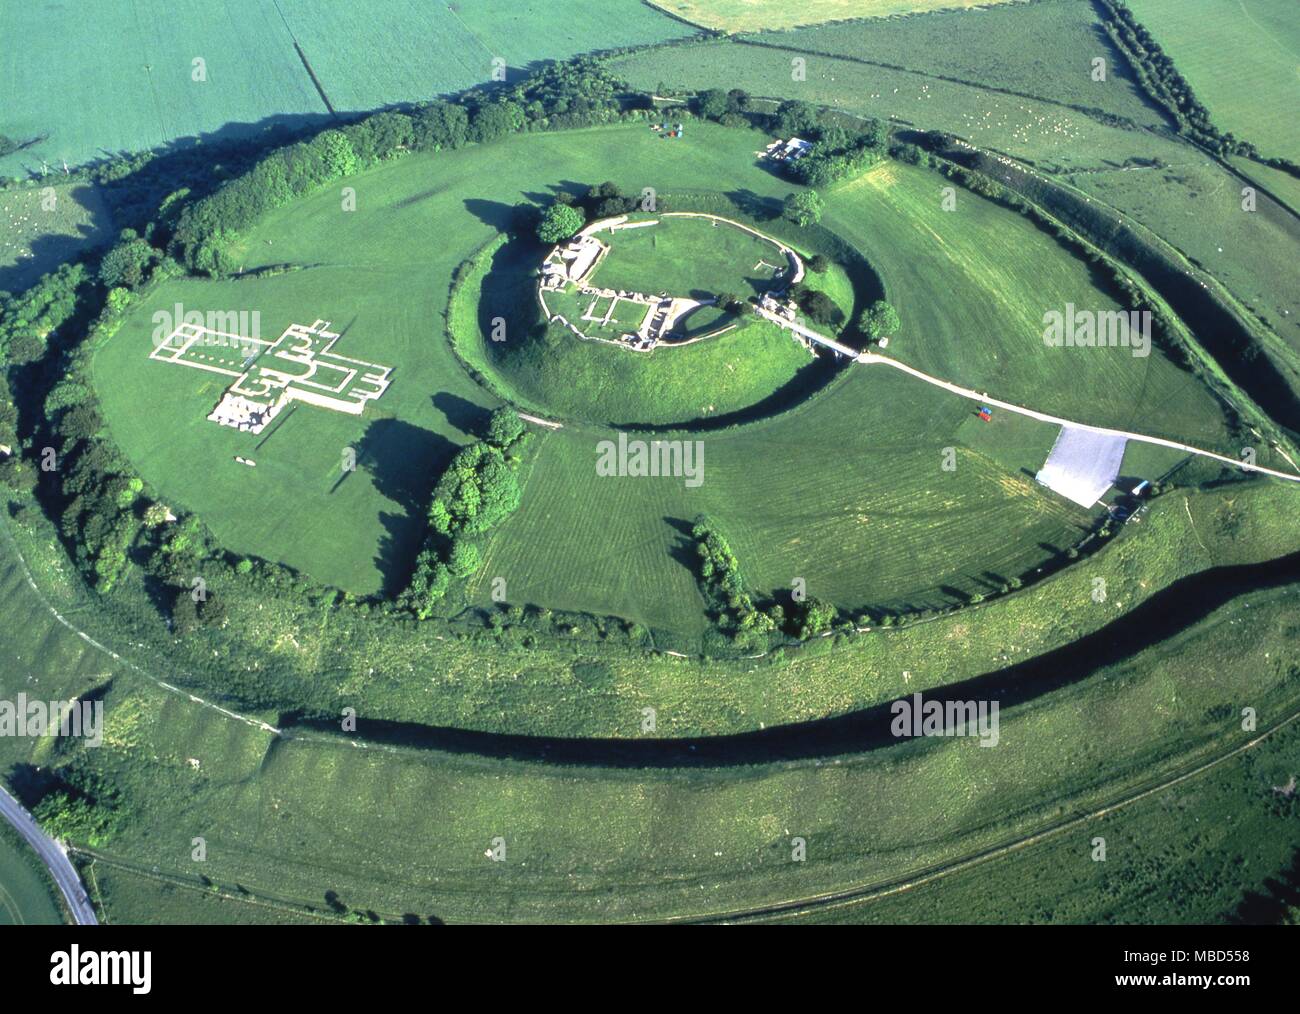 Old Sarum, Wiltshire. The mound of the Iron Age hill fort into which was built the original cathedral of Salisbury. The ground plan is clearly marked and it is said to be a centre for important leys. Stock Photo